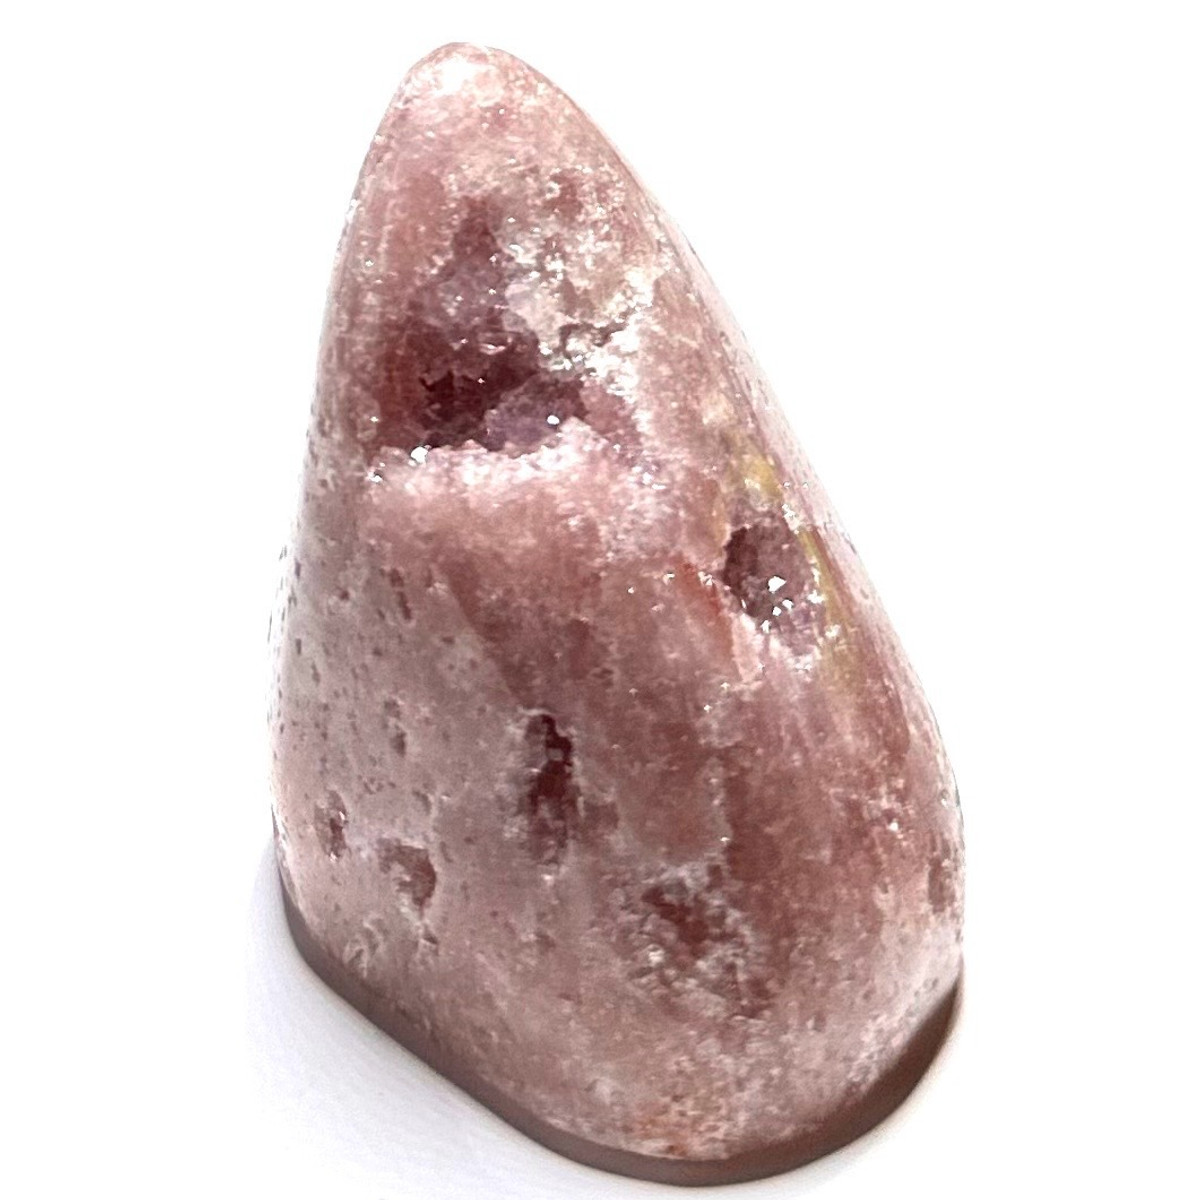 One of a Kind Pink Amethyst cluster Stone-2 1/2 x 2"